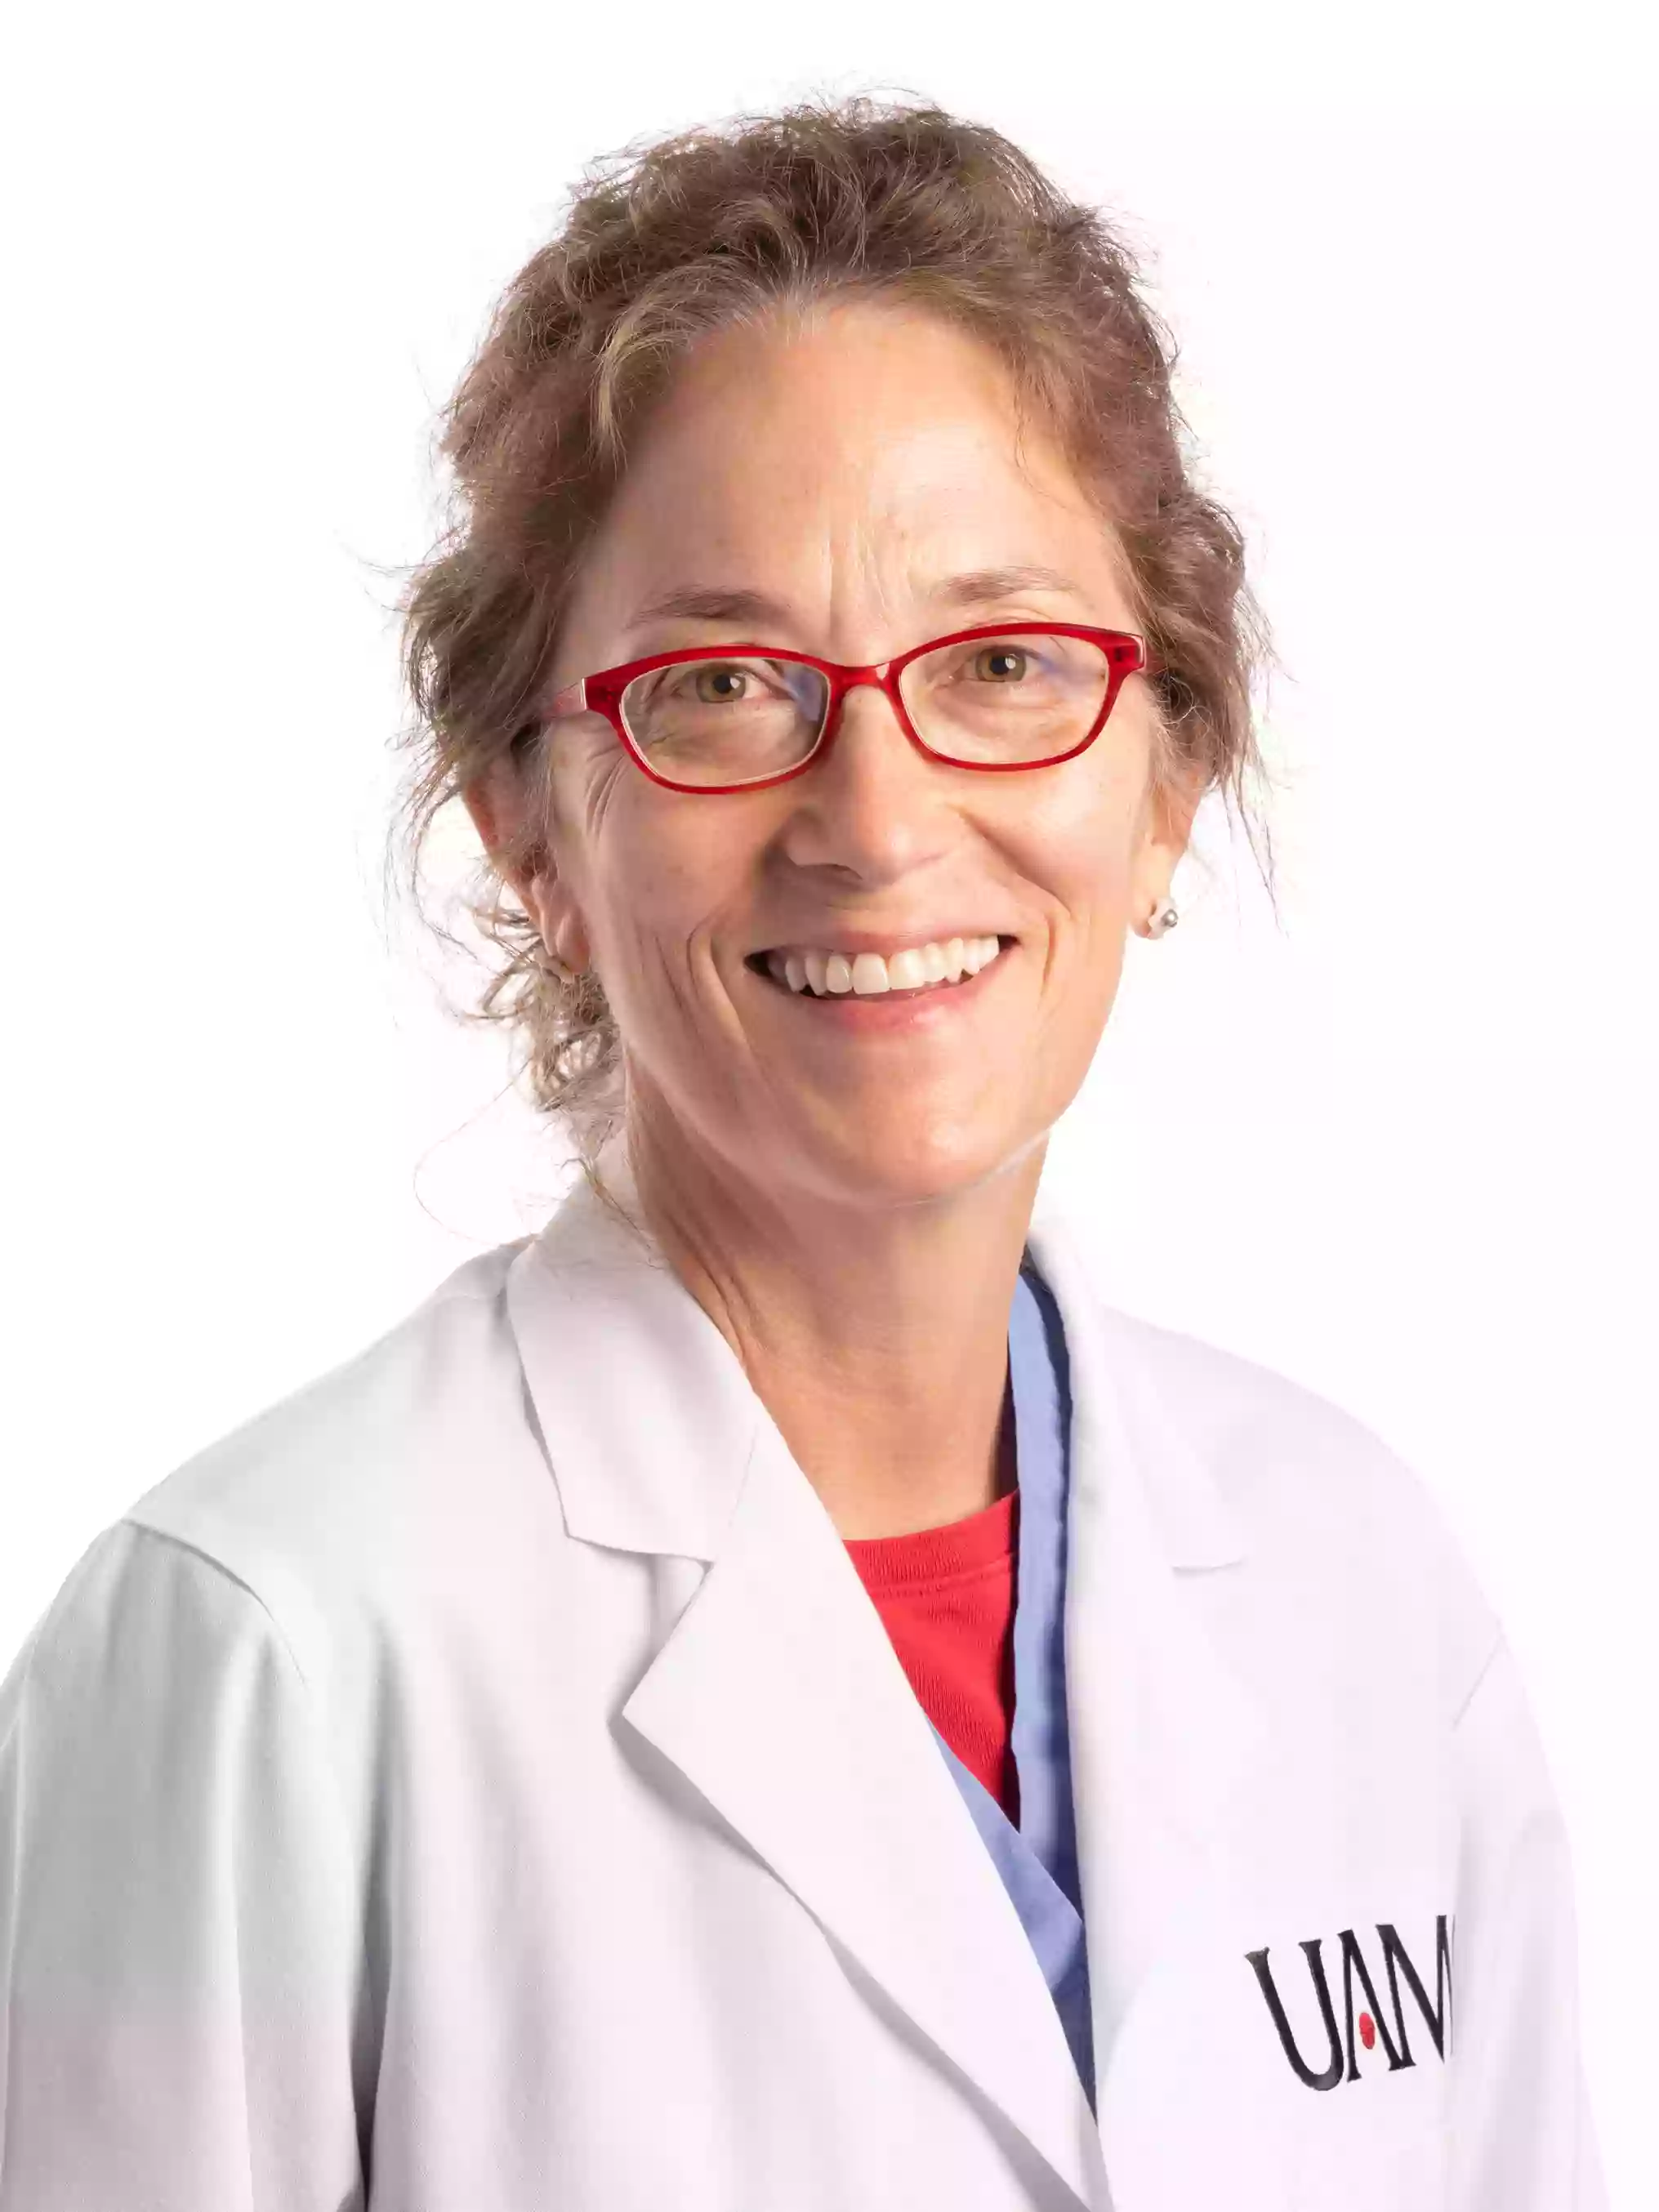 UAMS Health - Clare Campbell Nesmith, M.D.